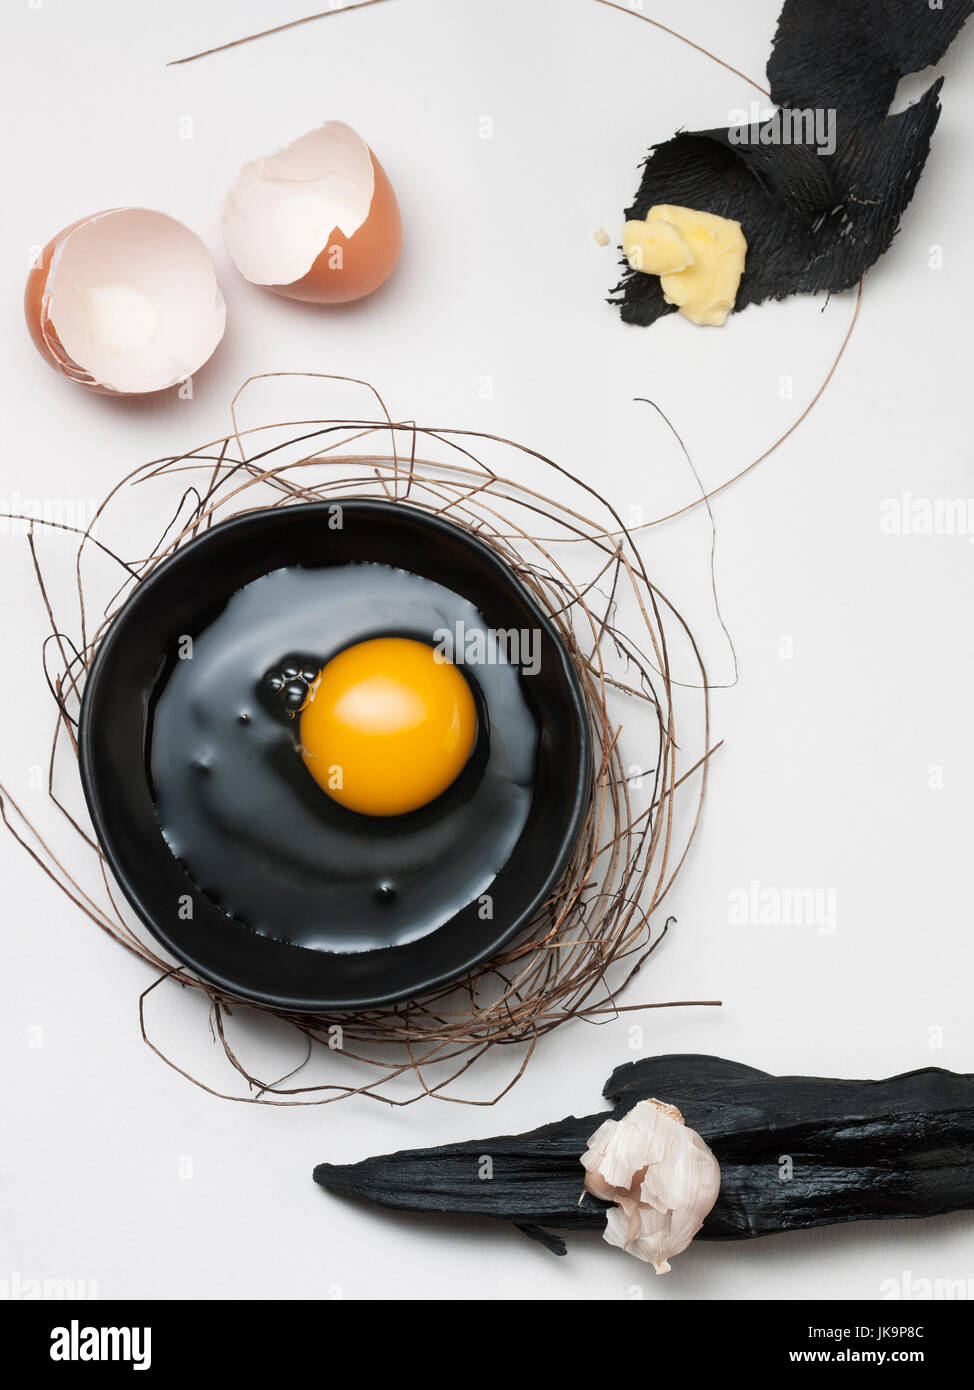 art of eggs on the black dish with the bush or Bird's nest and seasoning on white wooden background Stock Photo